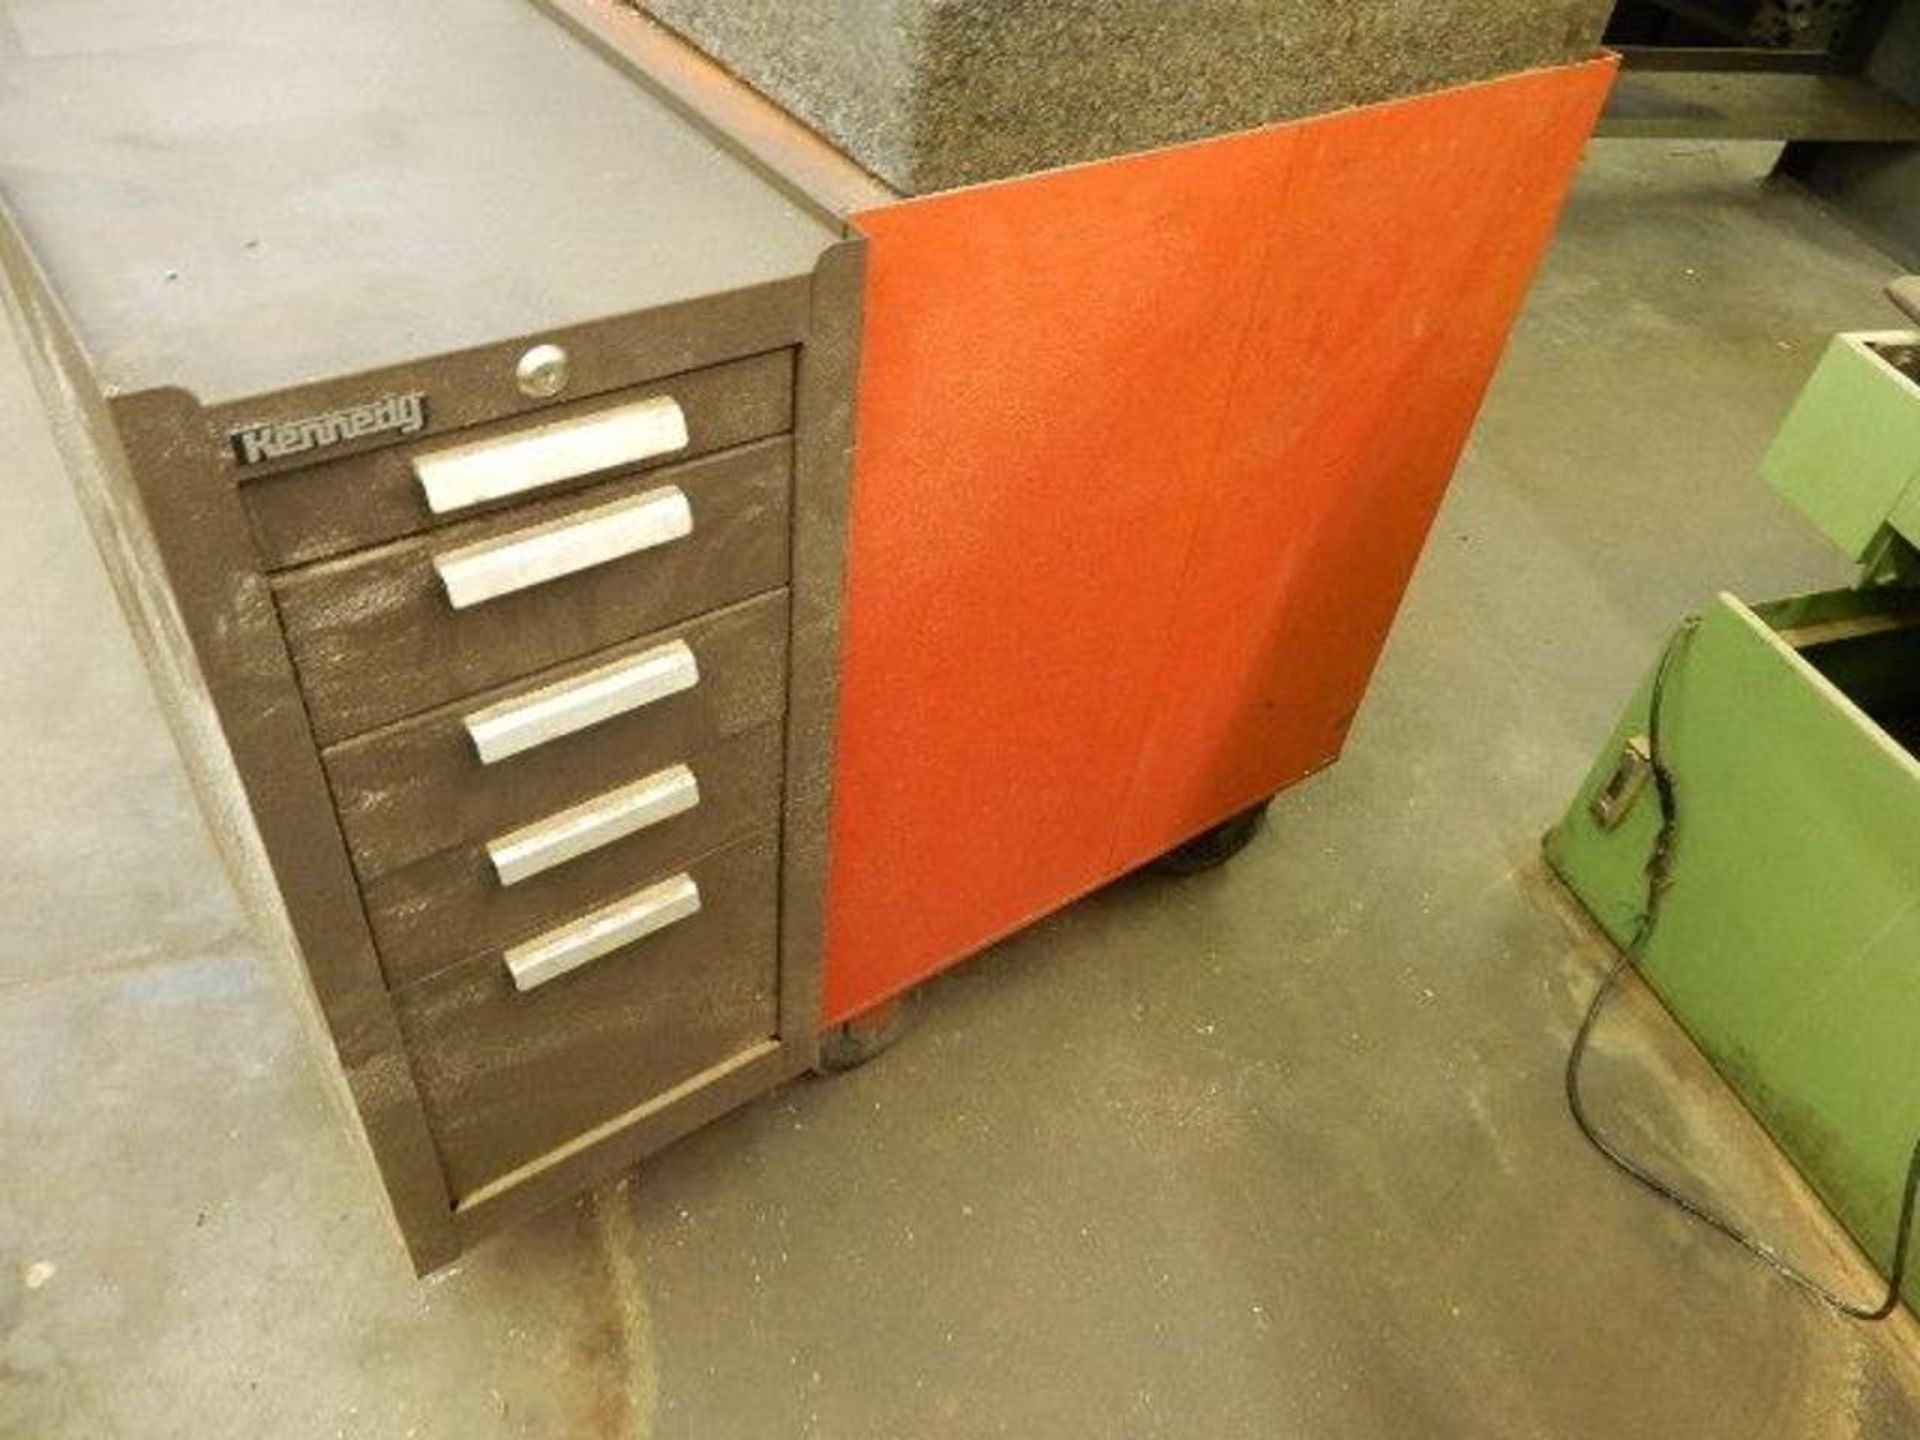 Kennedy Tool Box, with 18" x 24" x 4" Granite Surface Plate - Image 6 of 6